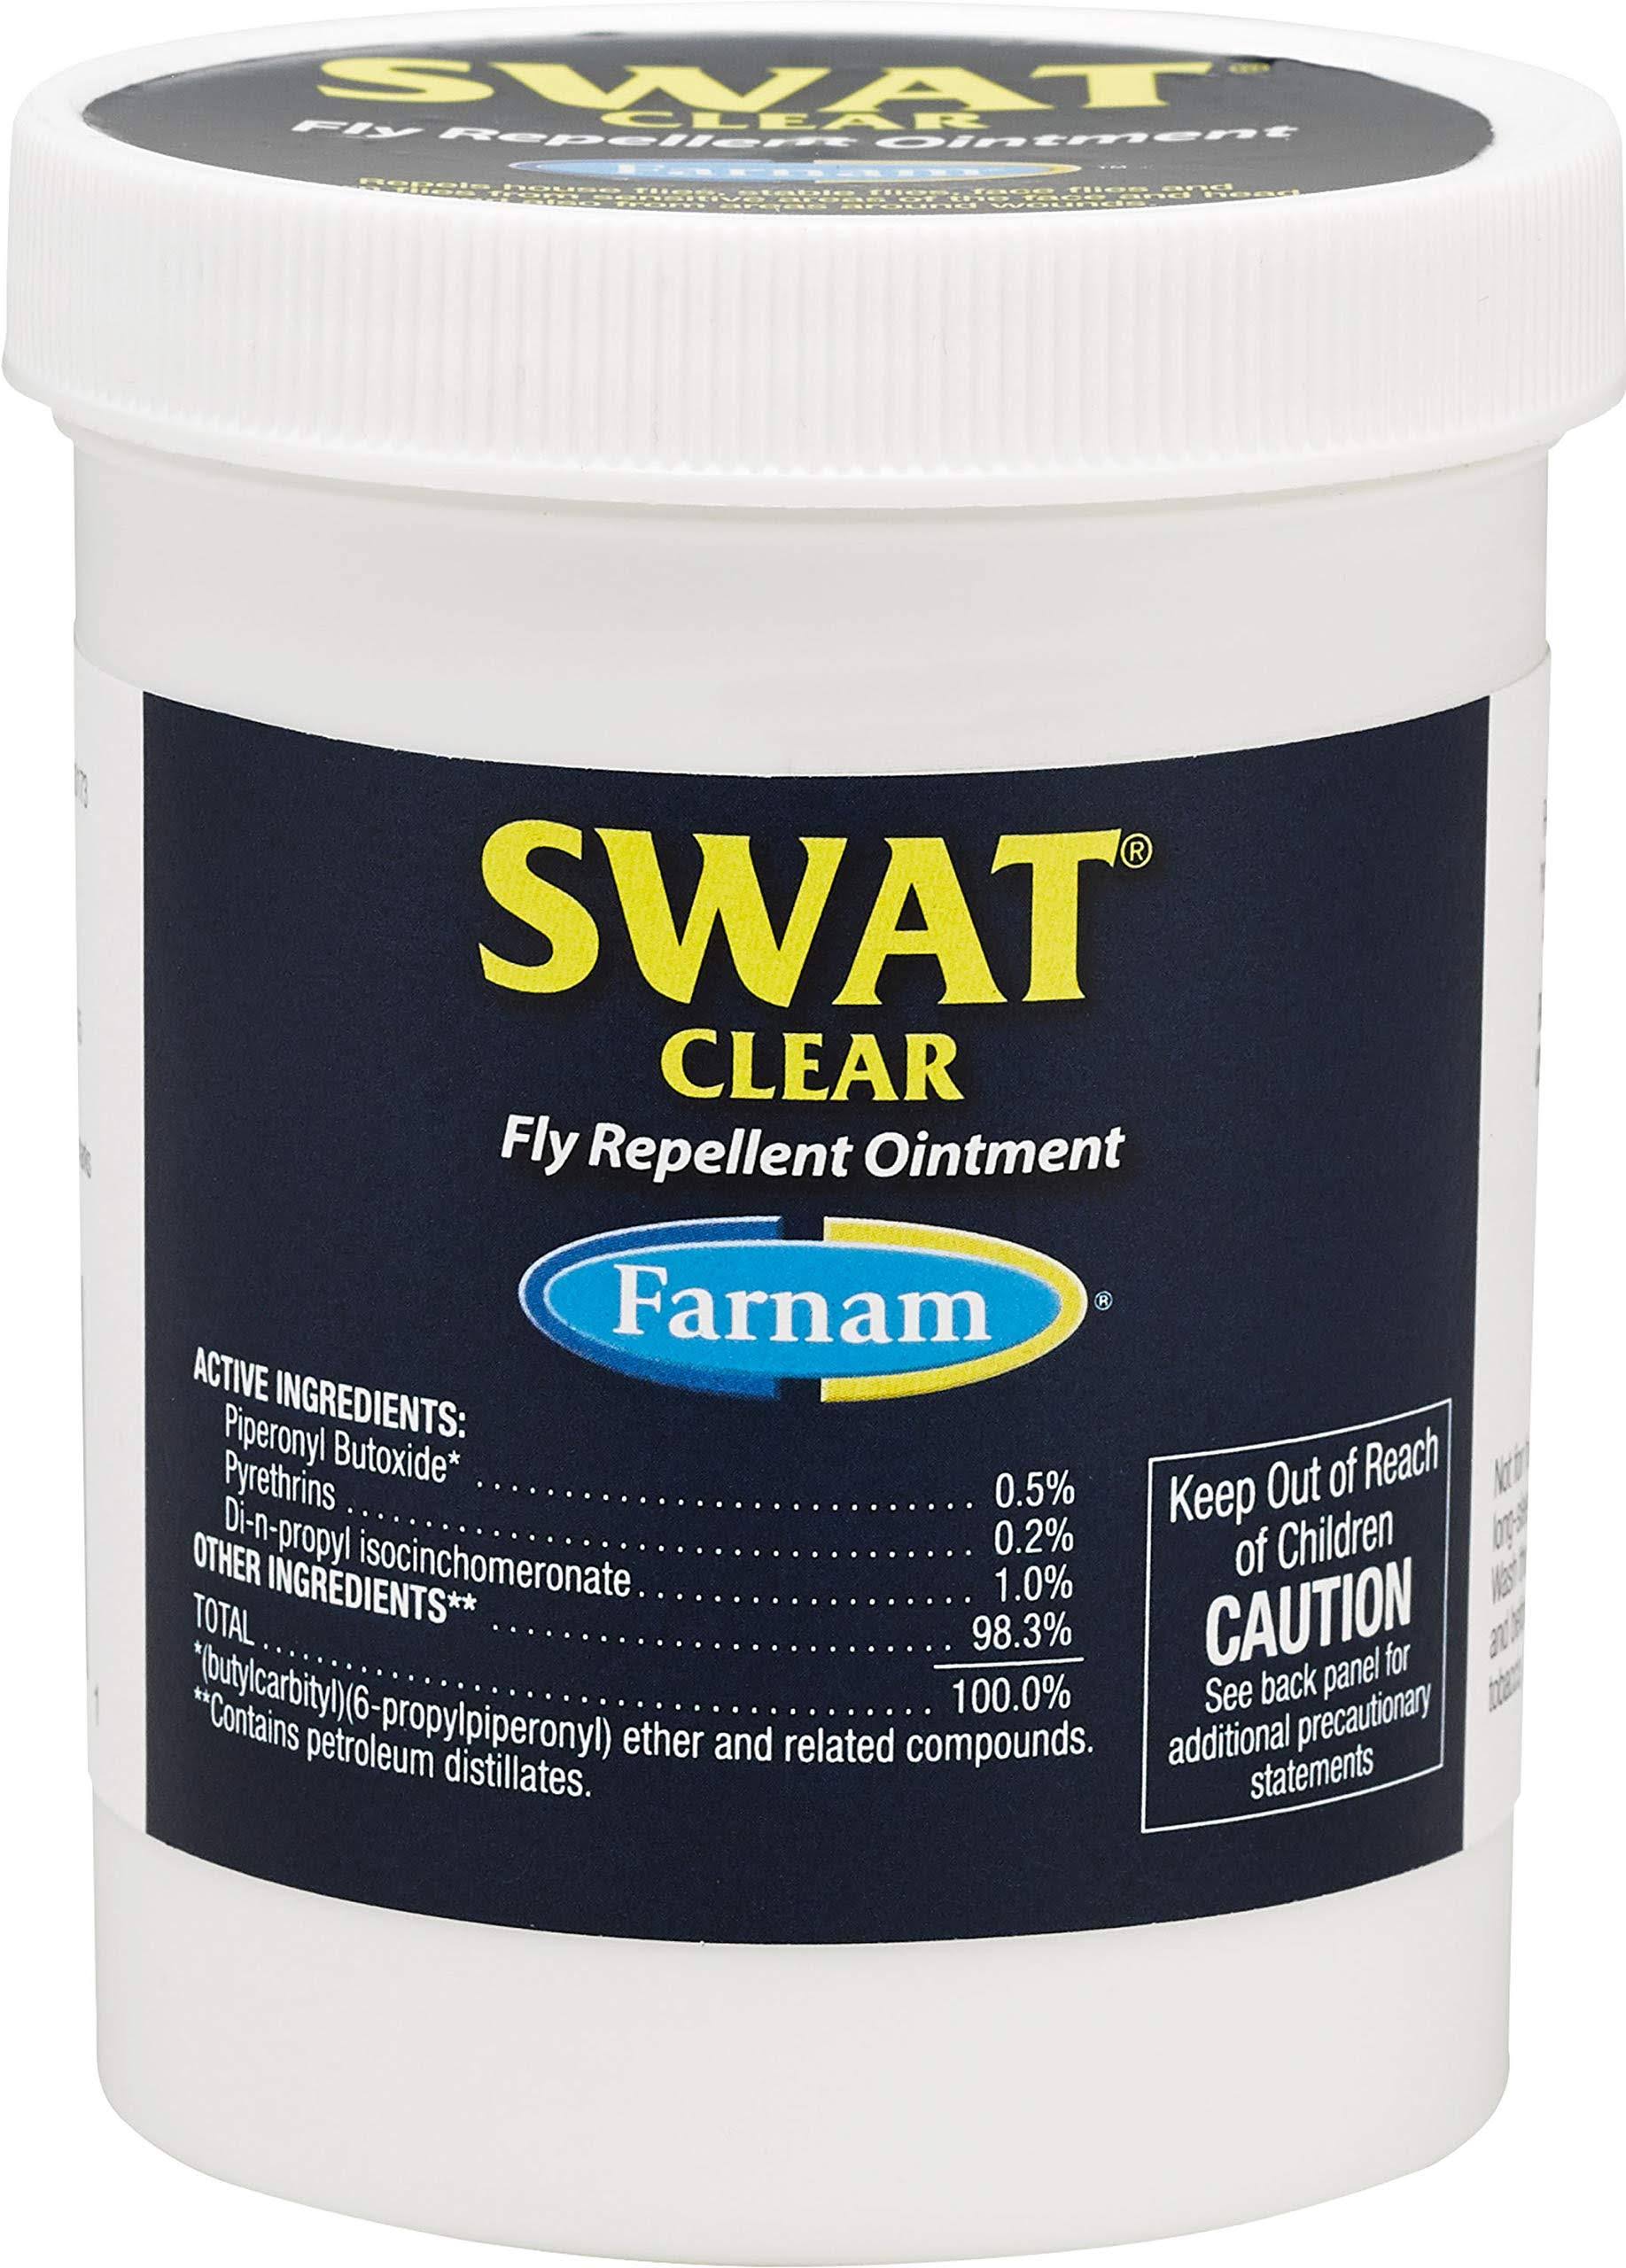 Farnam Swat Clear Fly Repellent Ointment